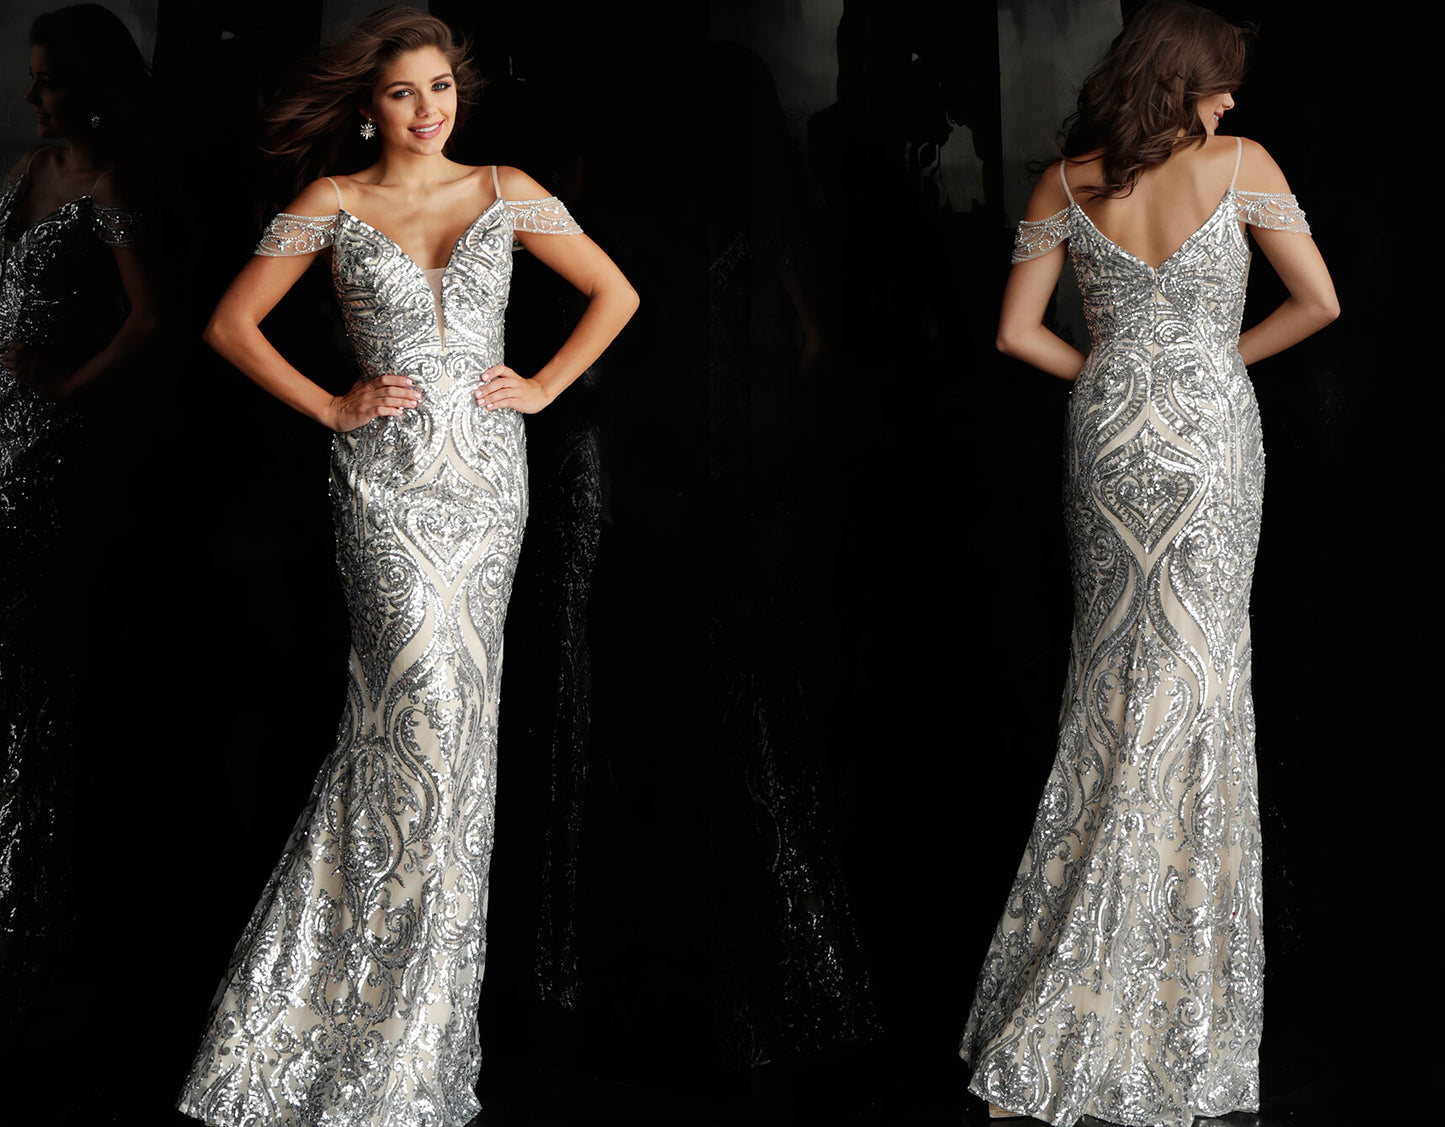 JVN67256 romantic off the shoulder embellished prom dress evening gown informal wedding dress silver nude pageant gown 